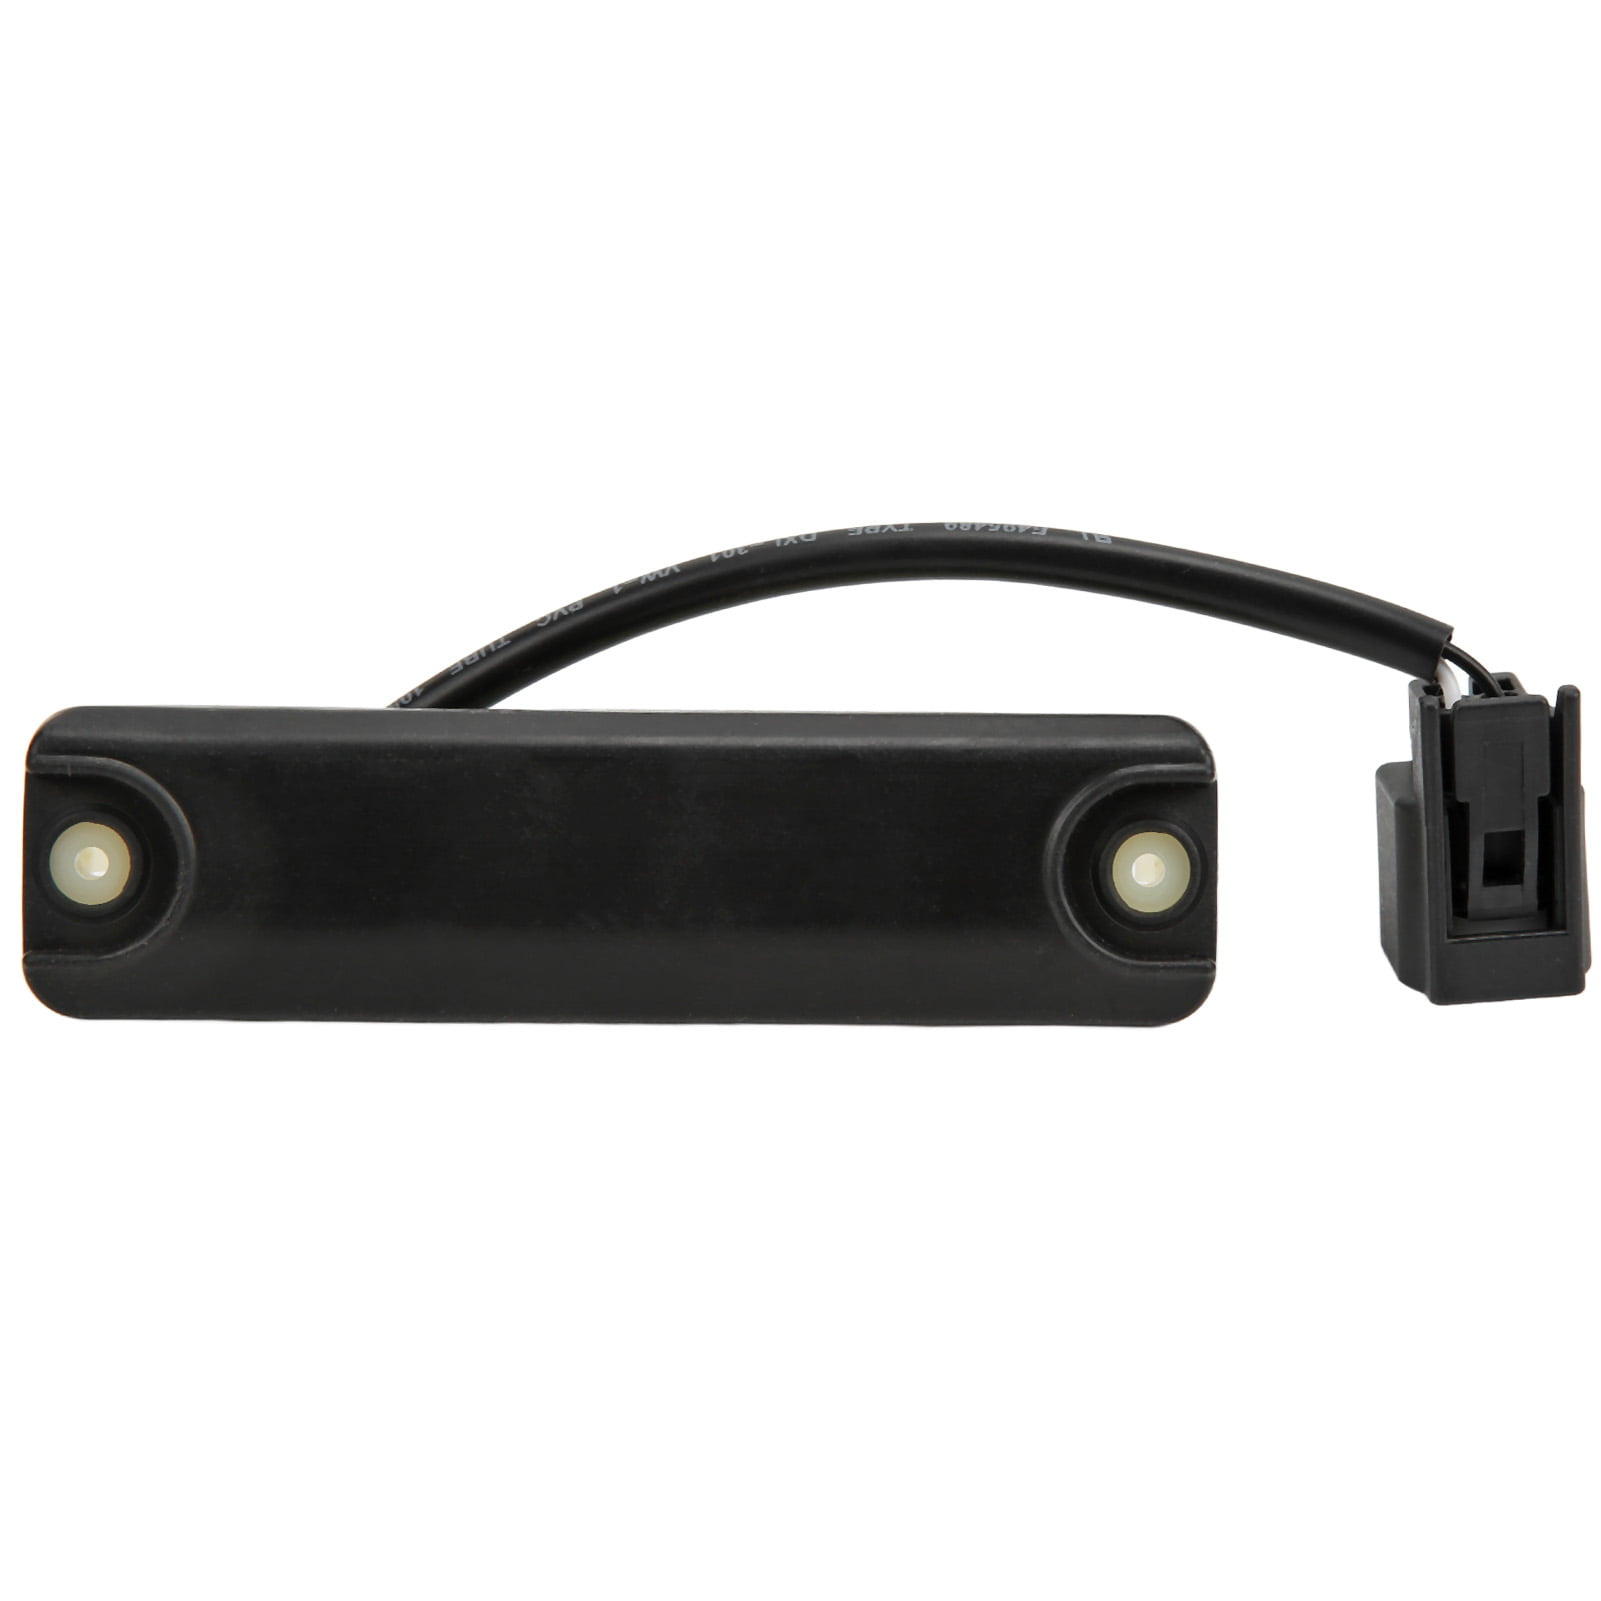 Liftgate Release Switch Tailgate Opening Release Switch 84840‑35010 Plug and Play Replacement for 4RUNNER 2003‑2020 